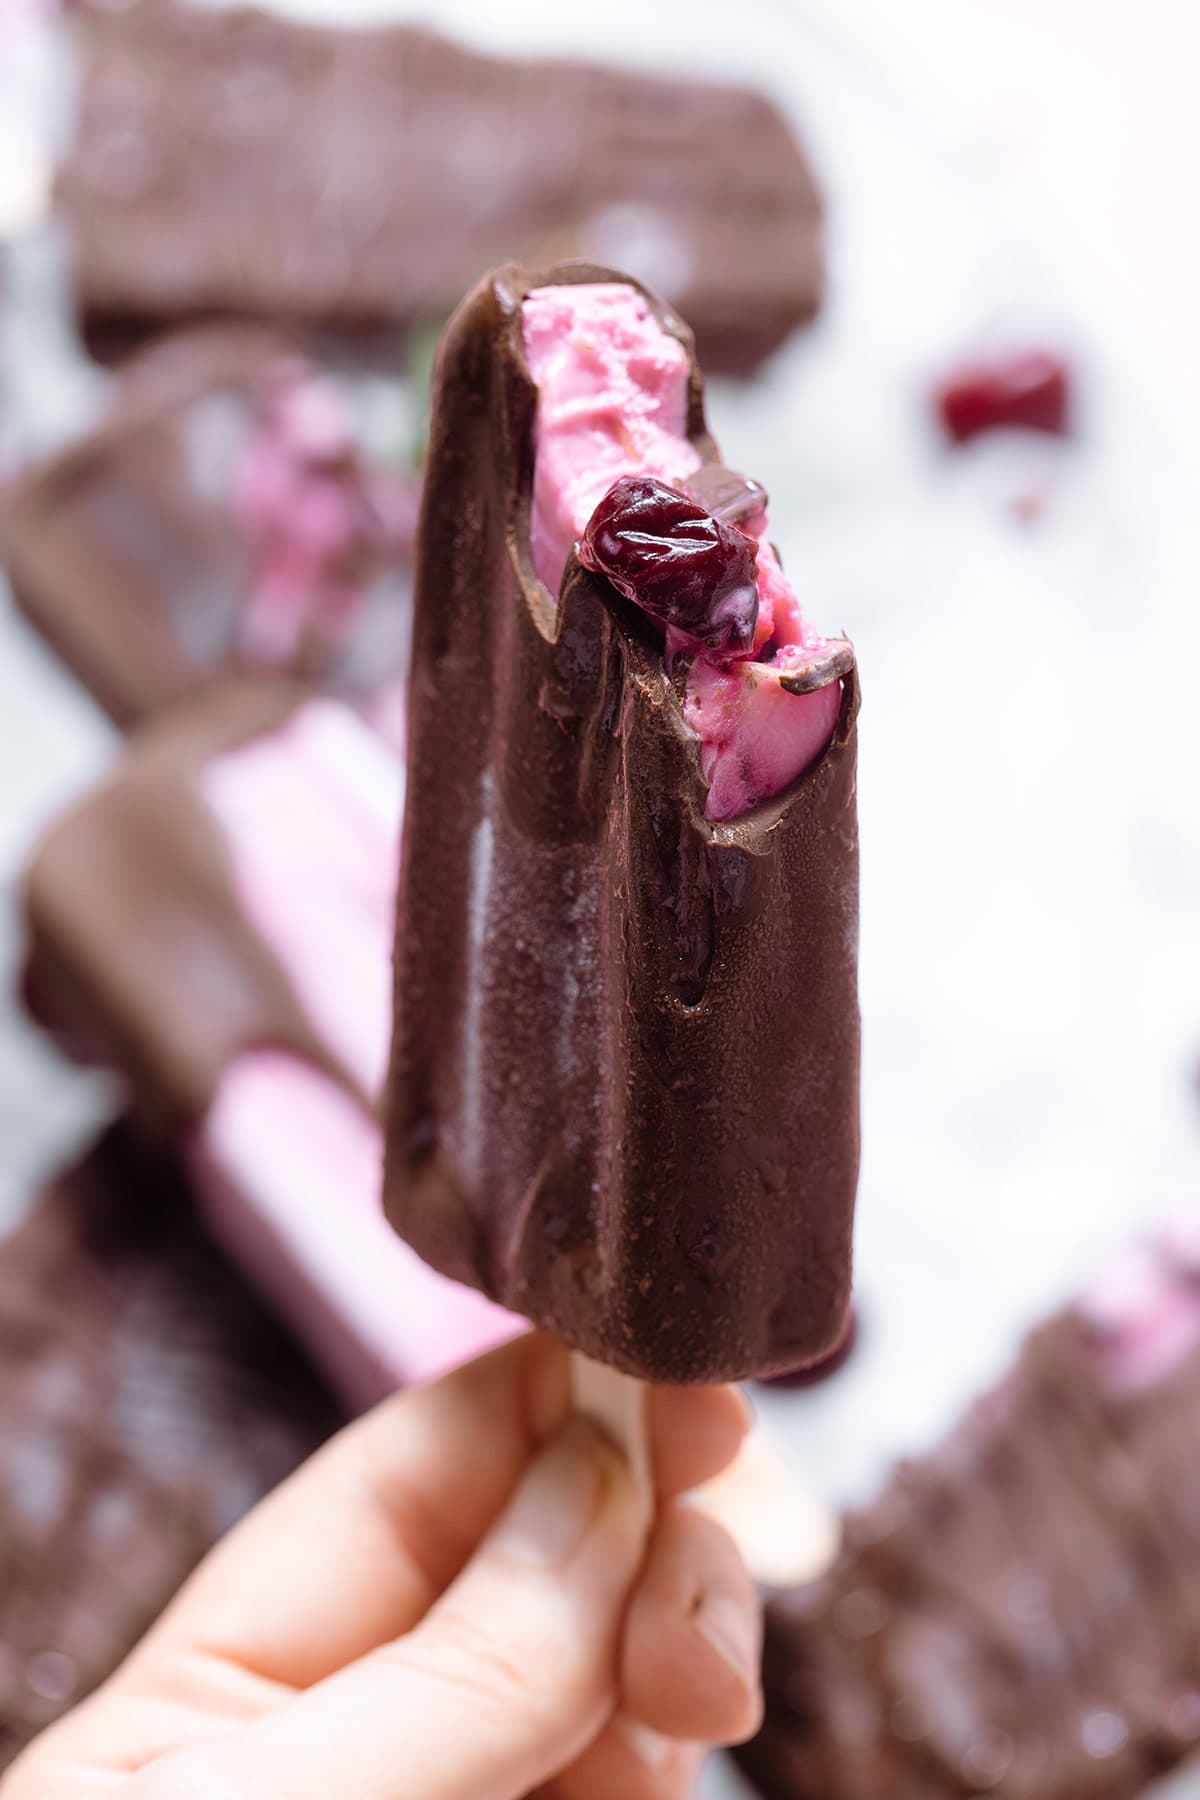 A hand holding a pink popsicle completely covered with chocolate with the corner bitten off.